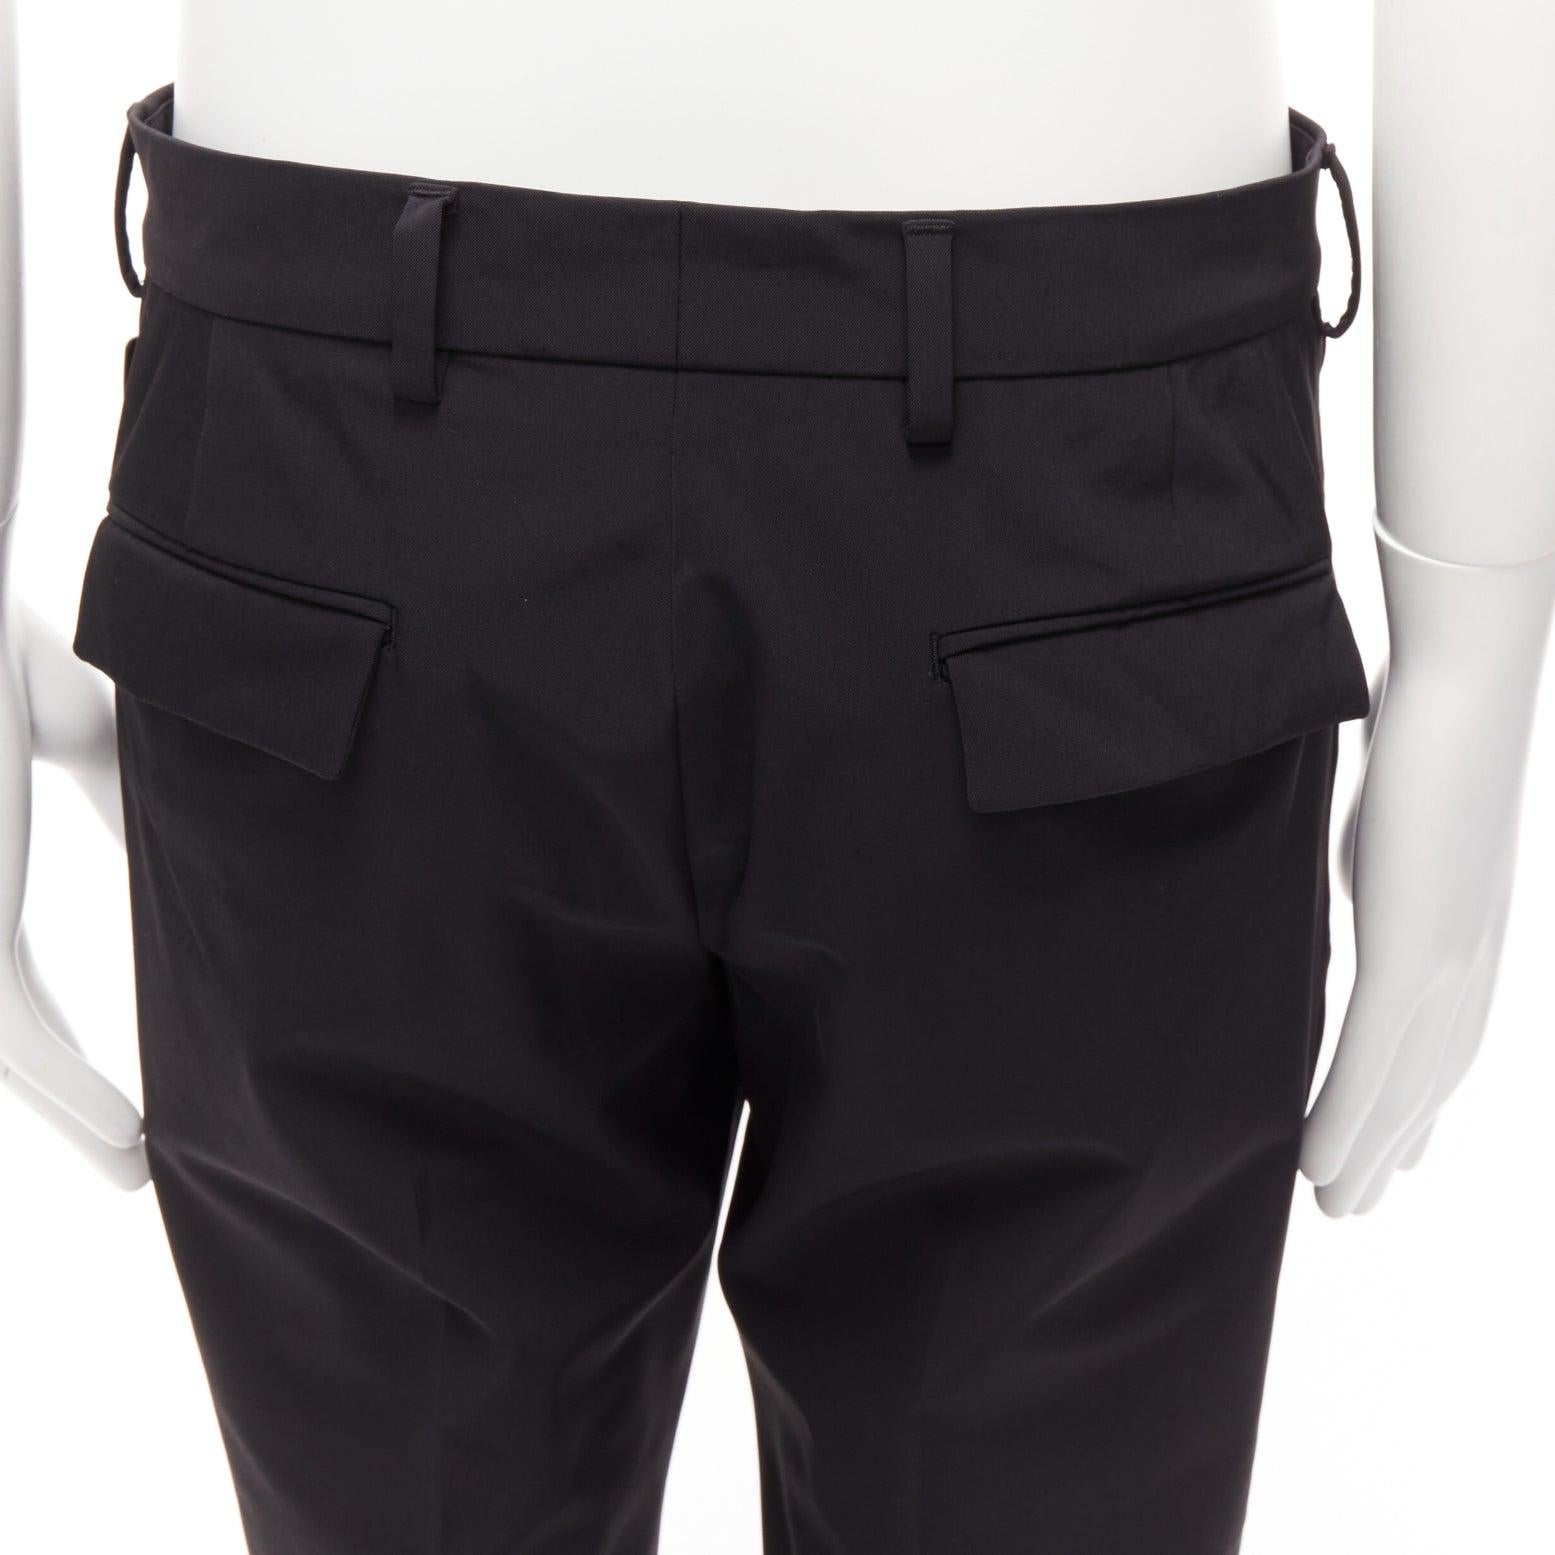 PRADA 2019 black technical zip pocket flap back tapered cropped pants IT48 M
Reference: JSLE/A00138
Brand: Prada
Designer: Miuccia Prada
Collection: 2019
Material: Nylon
Color: Black
Pattern: Solid
Closure: Zip
Lining: Black Fabric
Extra Details: